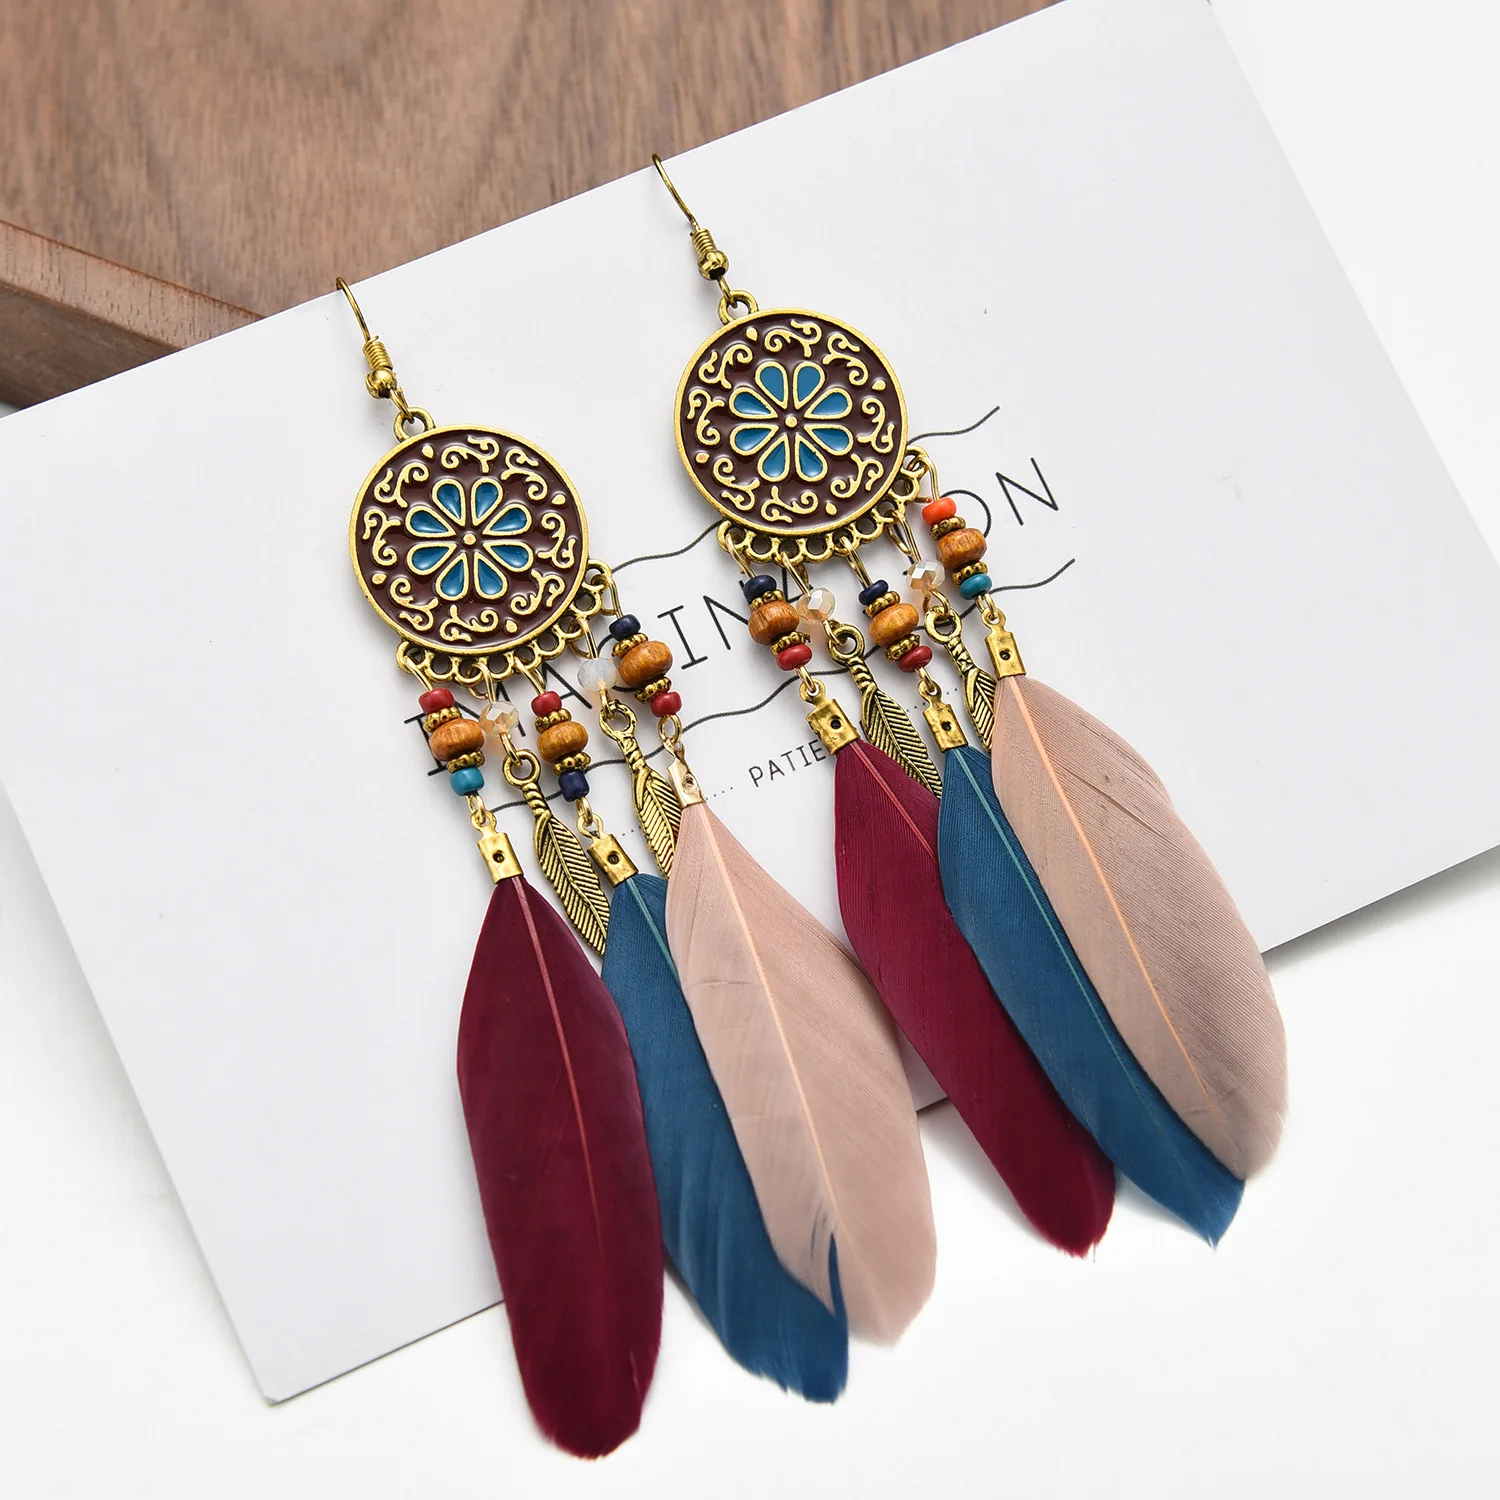 

Vintage Feather Tassel Earrings For Women Accessories Round Drop Oil Flower Charm Earring Dream Catcher Bohemia Jewelry Aretes